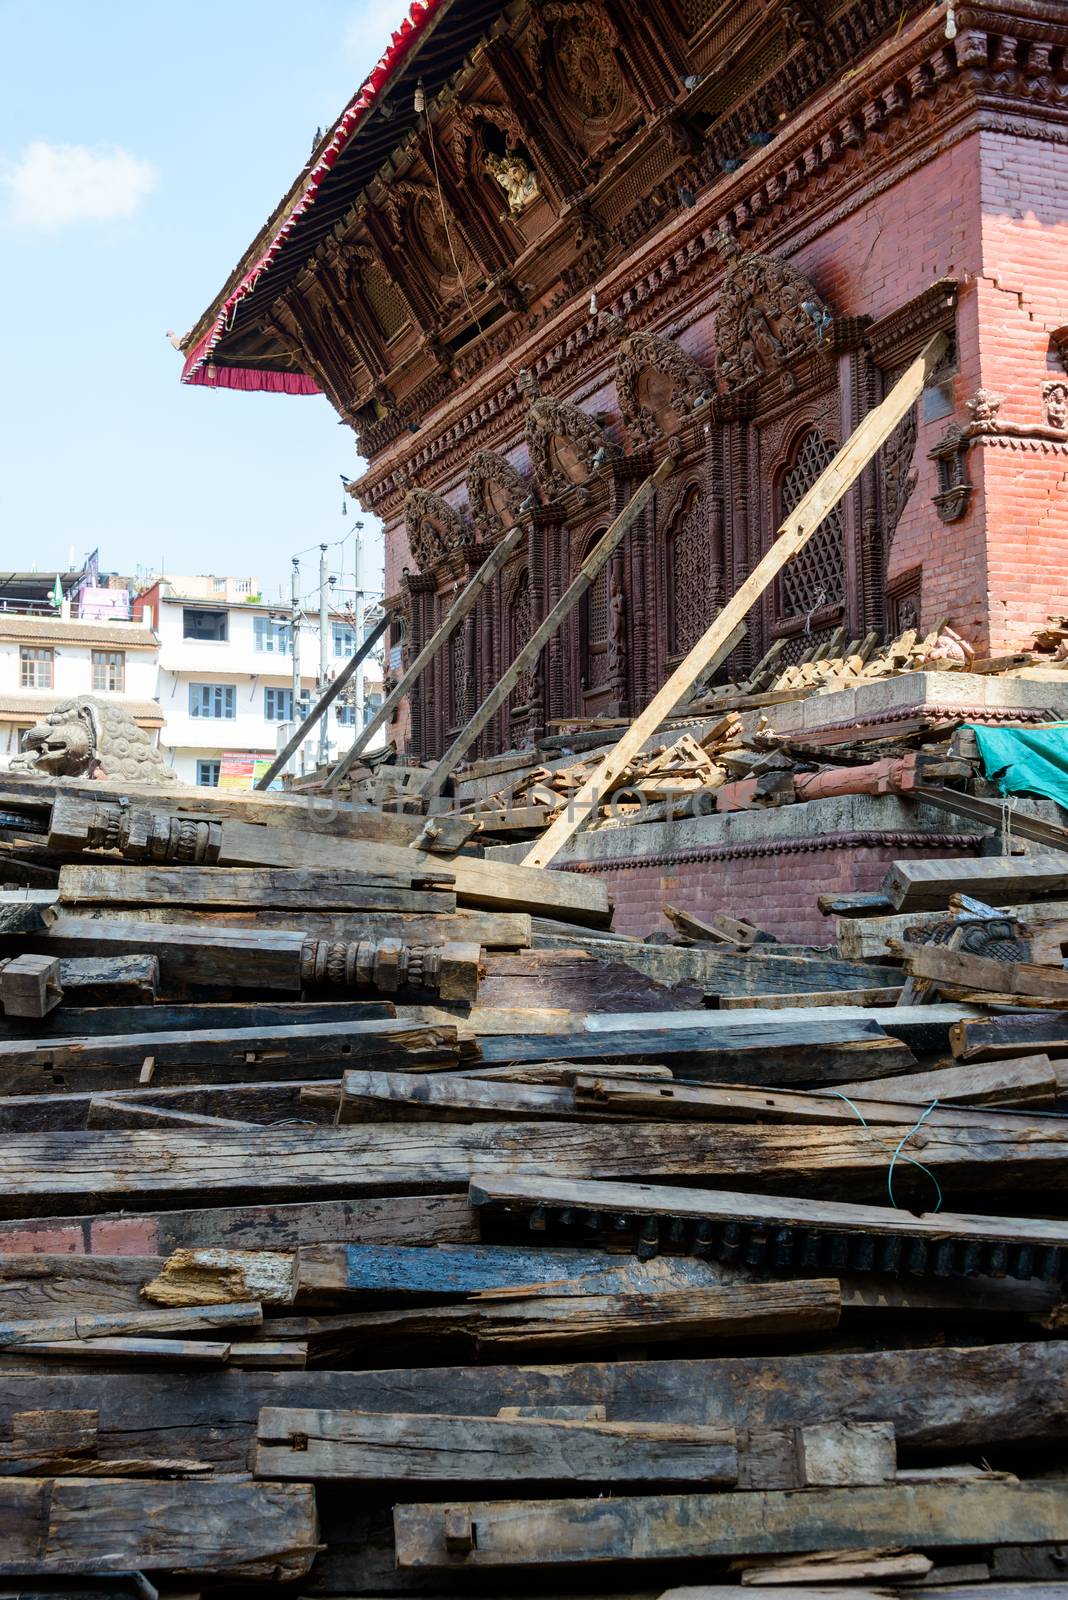 KATHMANDU, NEPAL - MAY 14, 2015: Durbar Square, a UNESCO World Heritage Site, is partially destroyed after two major earthquakes hit Nepal in the past weeks.